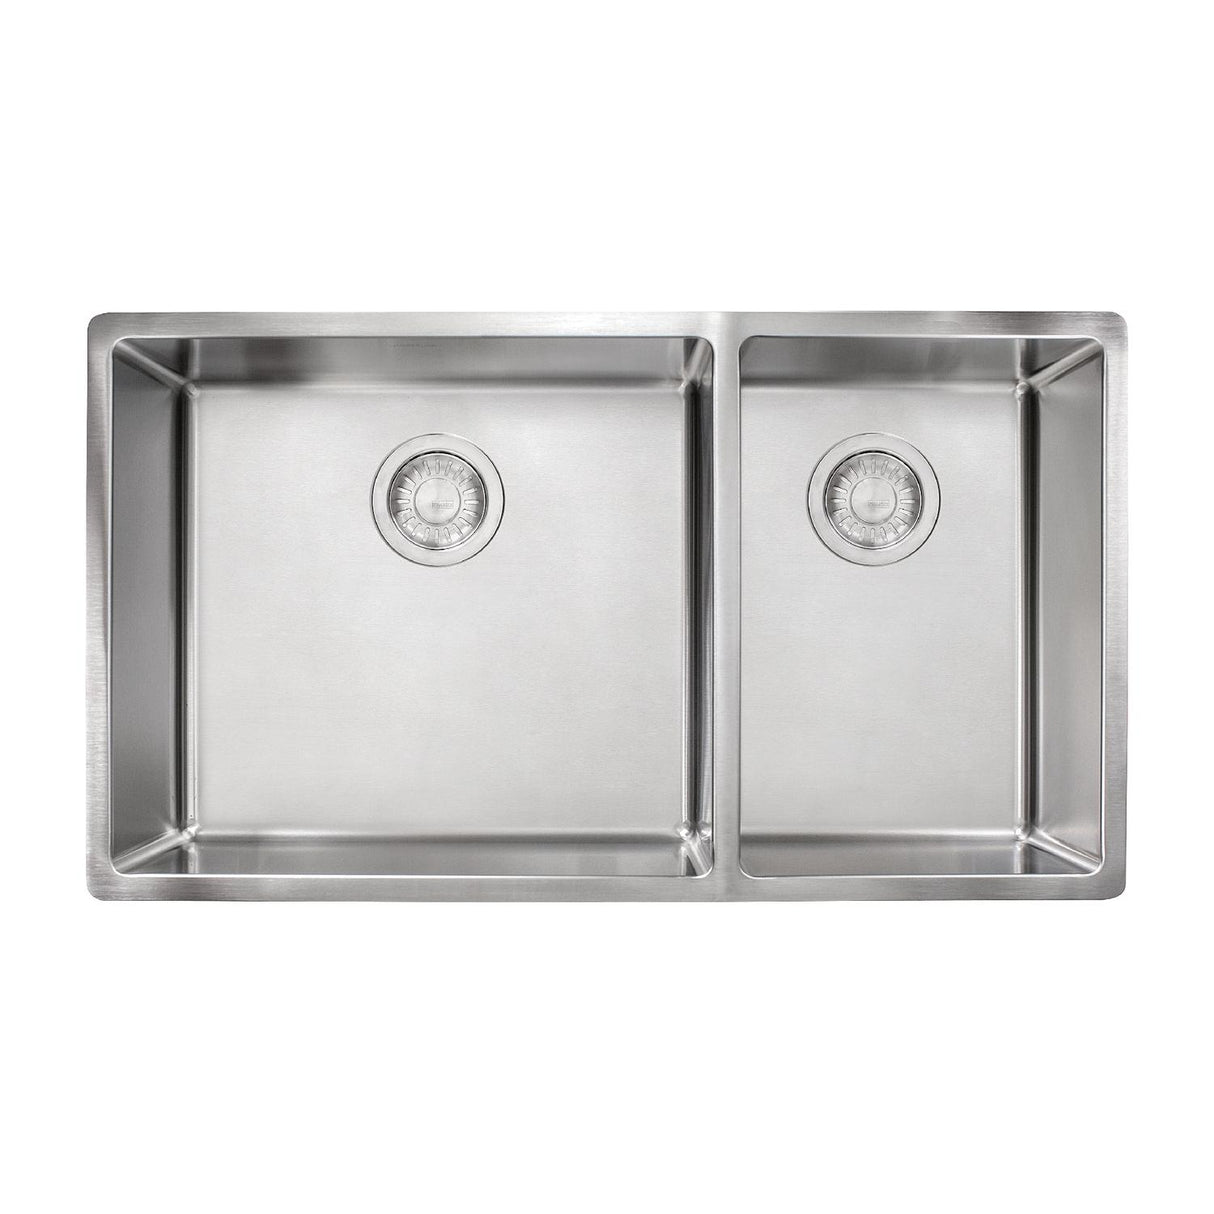 Franke CUX160 Sink, Stainless Steel